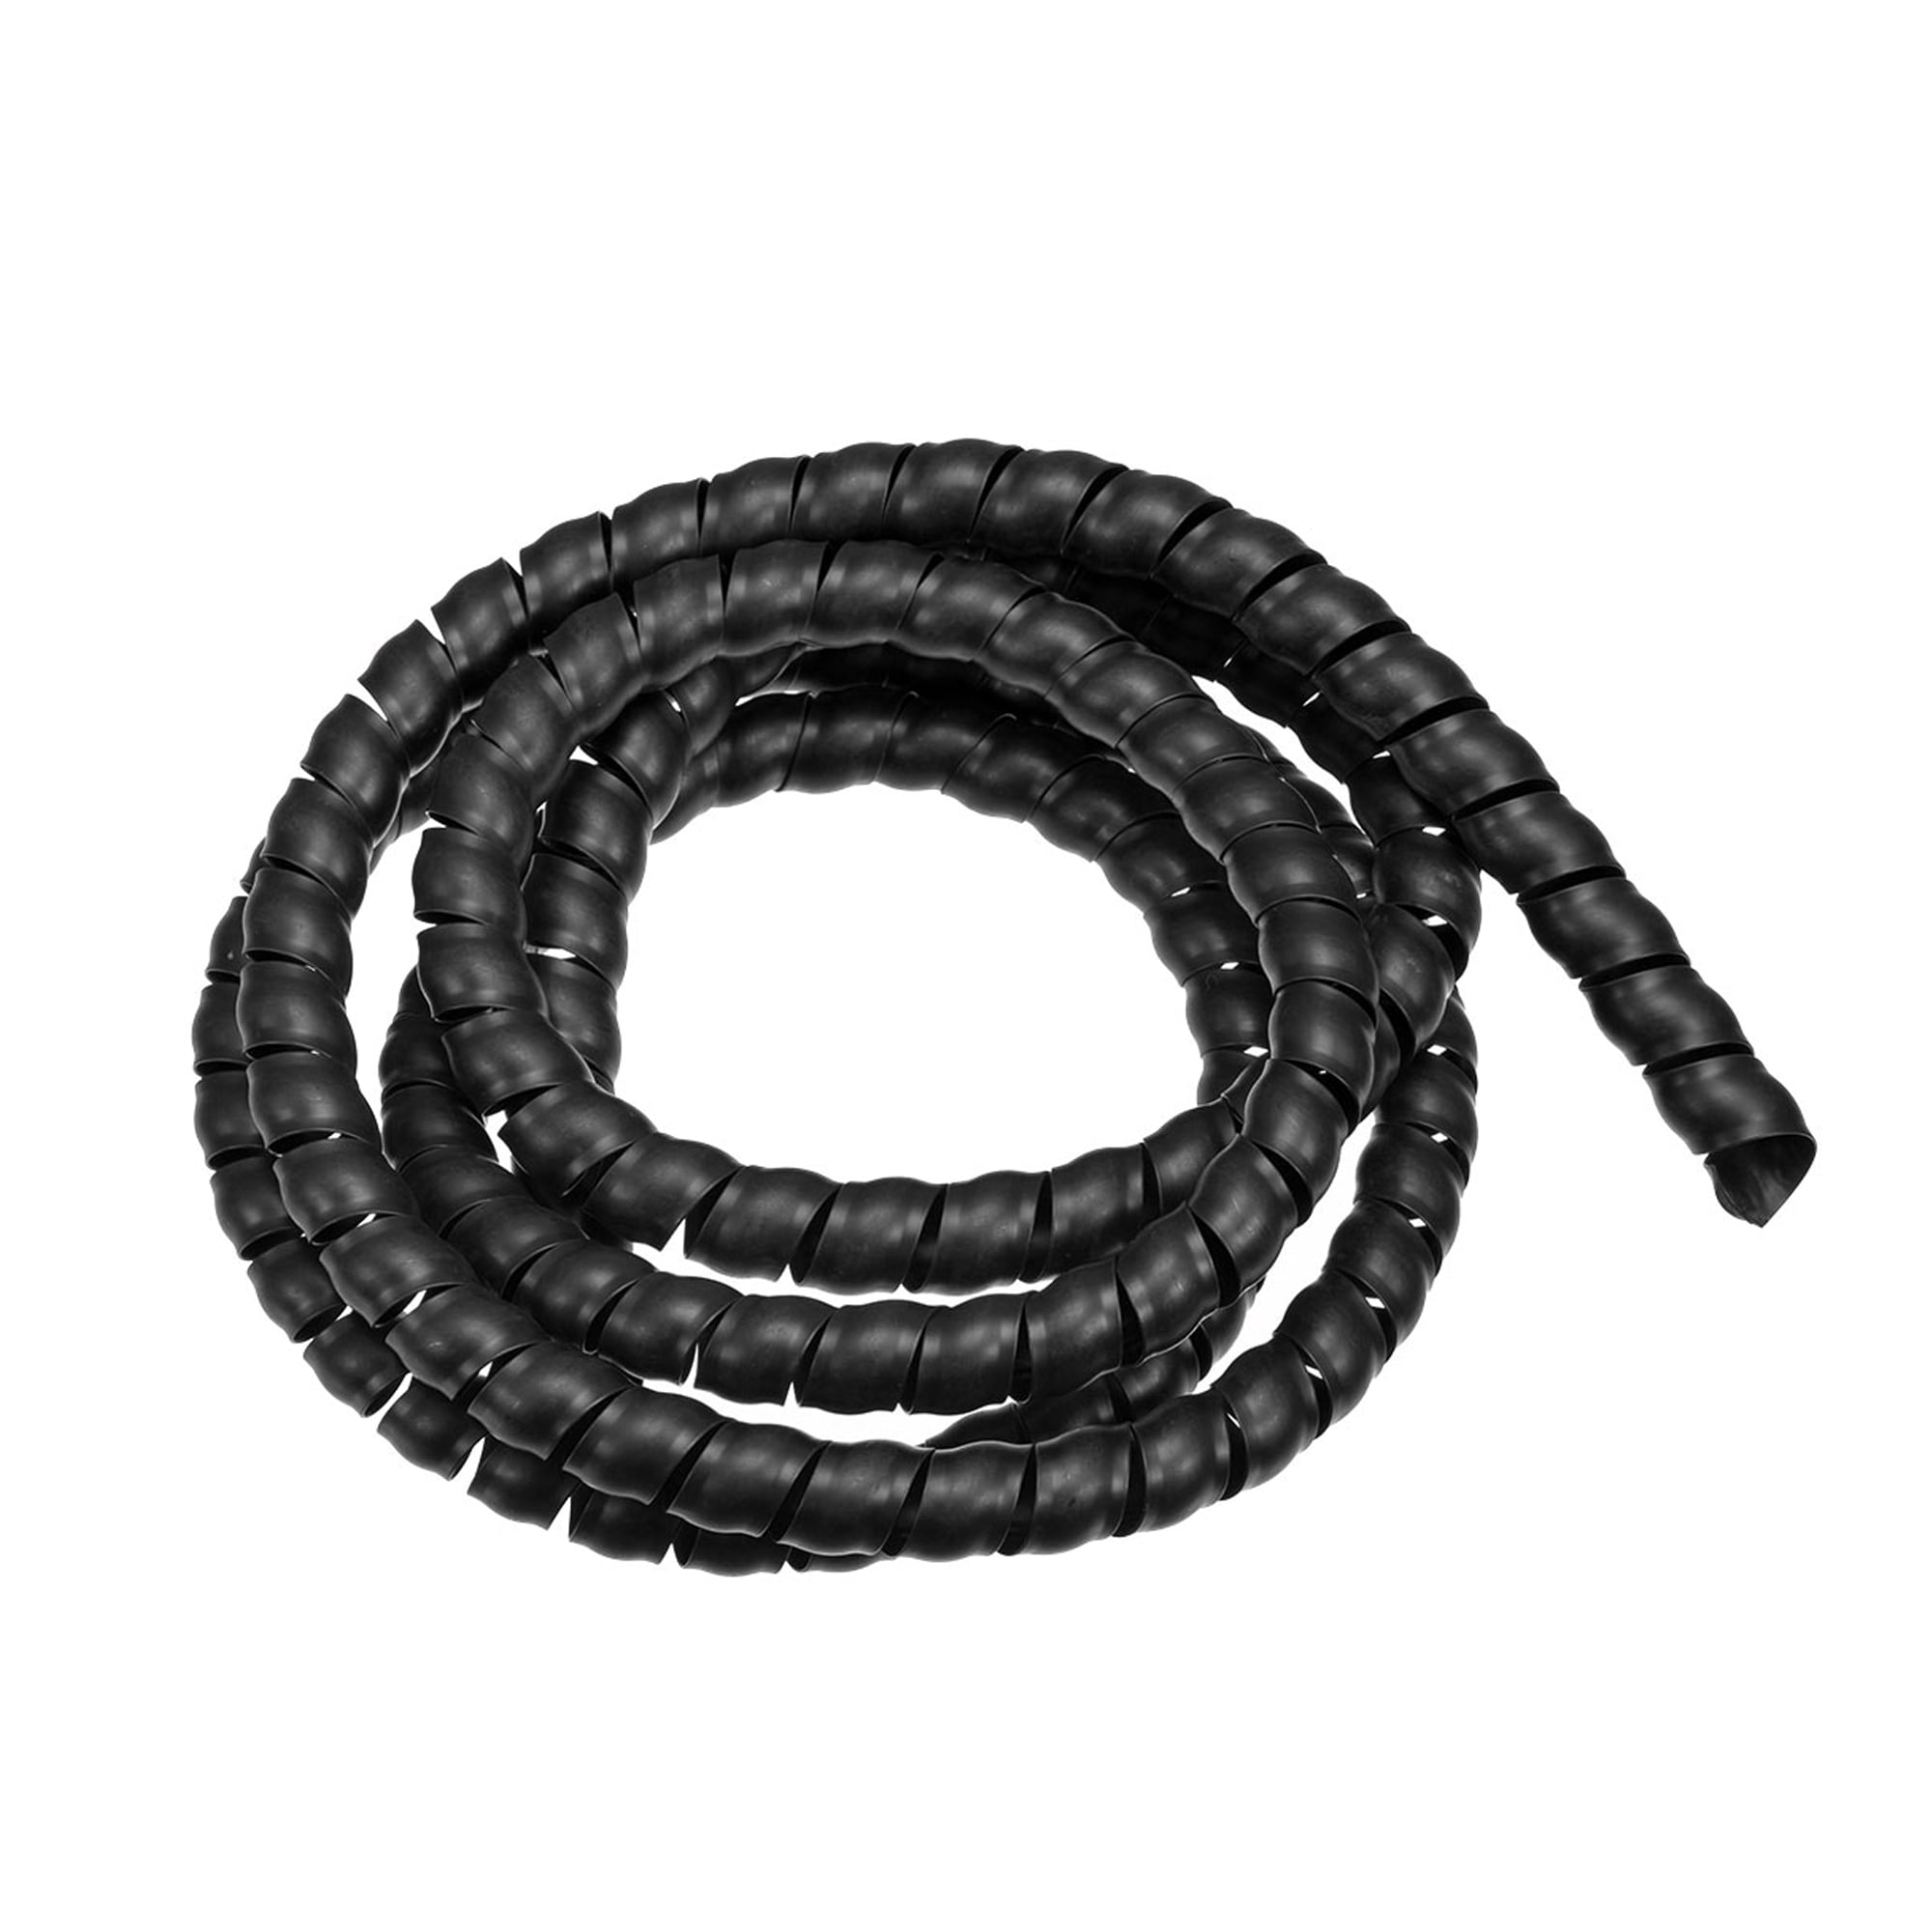 uxcell Flexible Spiral Tube Wrap Cable Management Sleeve 16mm X 19mm Computer Wire Manage Cord 3 Meters Length Black